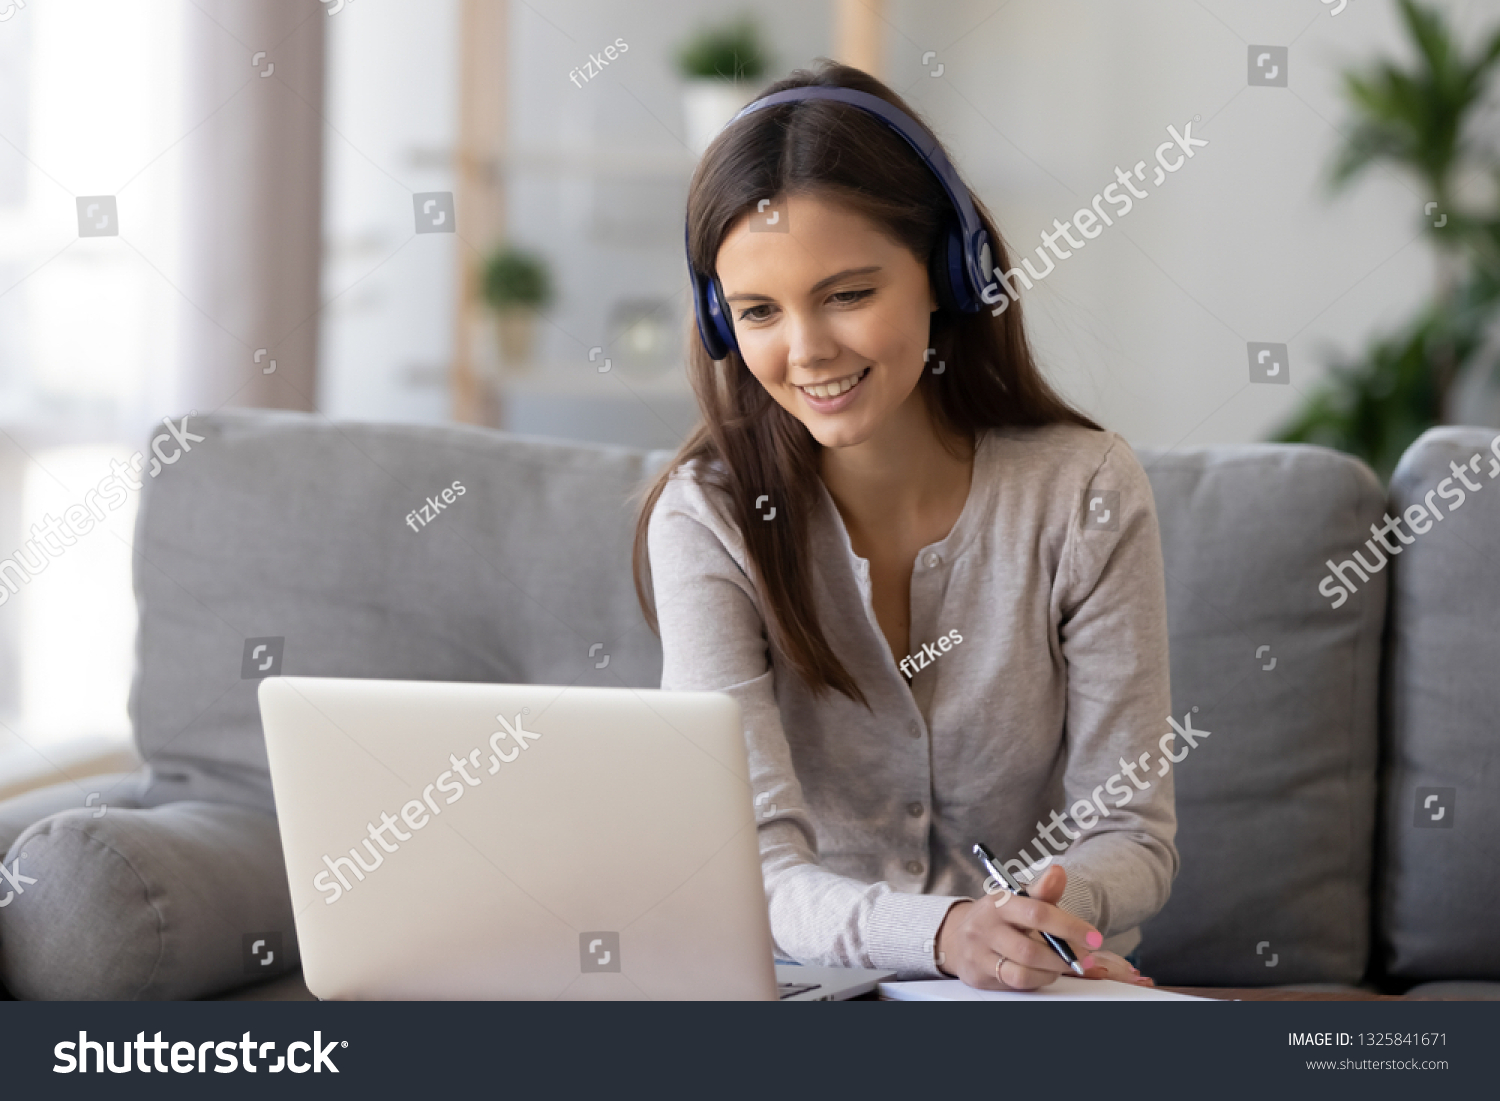 Smiling woman in headphones using laptop, writing notes, sitting on sofa at home, happy girl looking at computer screen, watching webinar, learning language online, distance education concept #1325841671